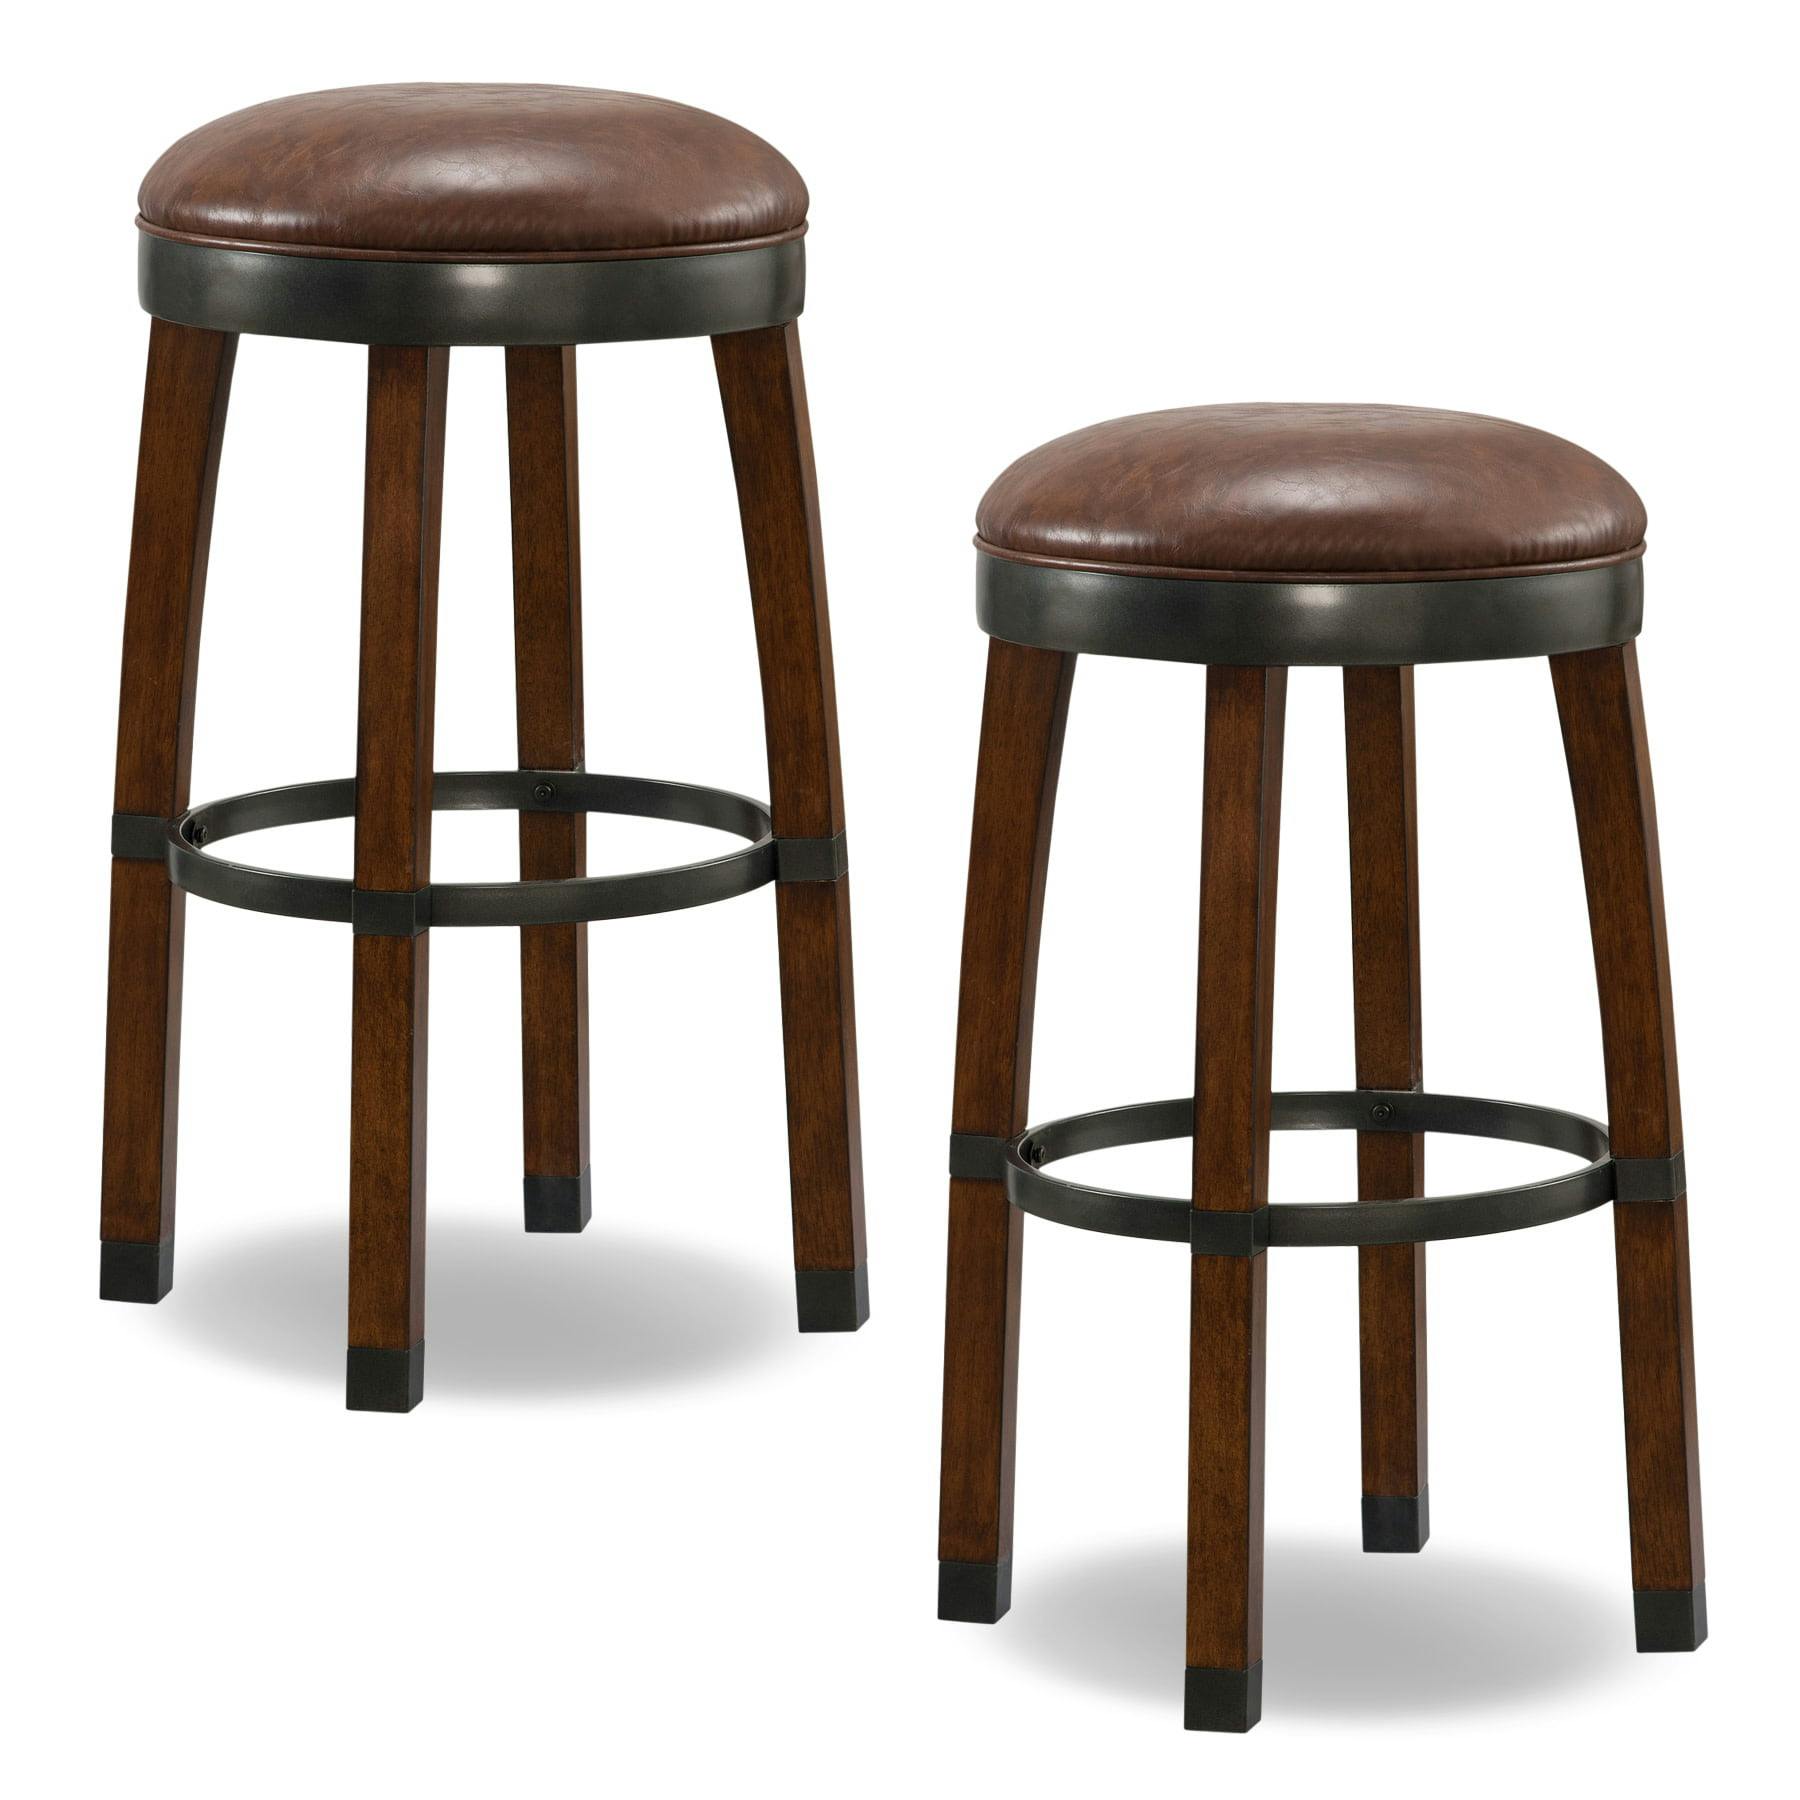 Favorite Finds Sienna Wood and Sable Leather Swivel Bar Stool